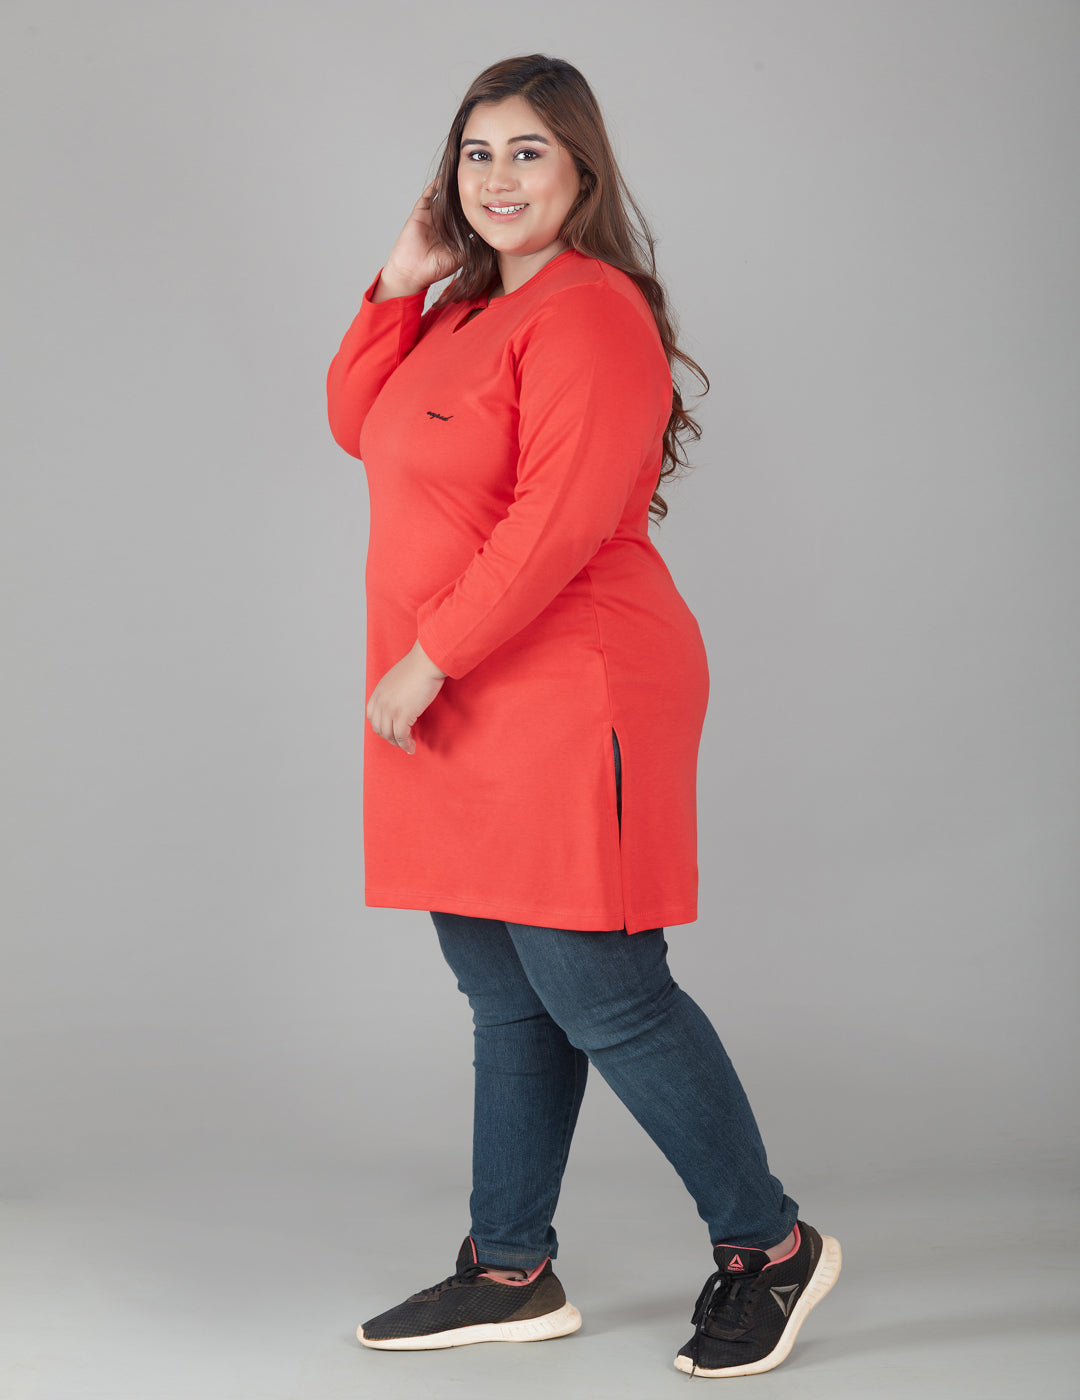 Full Sleeves Red Long Tops For Women in Pluz Size at best prices